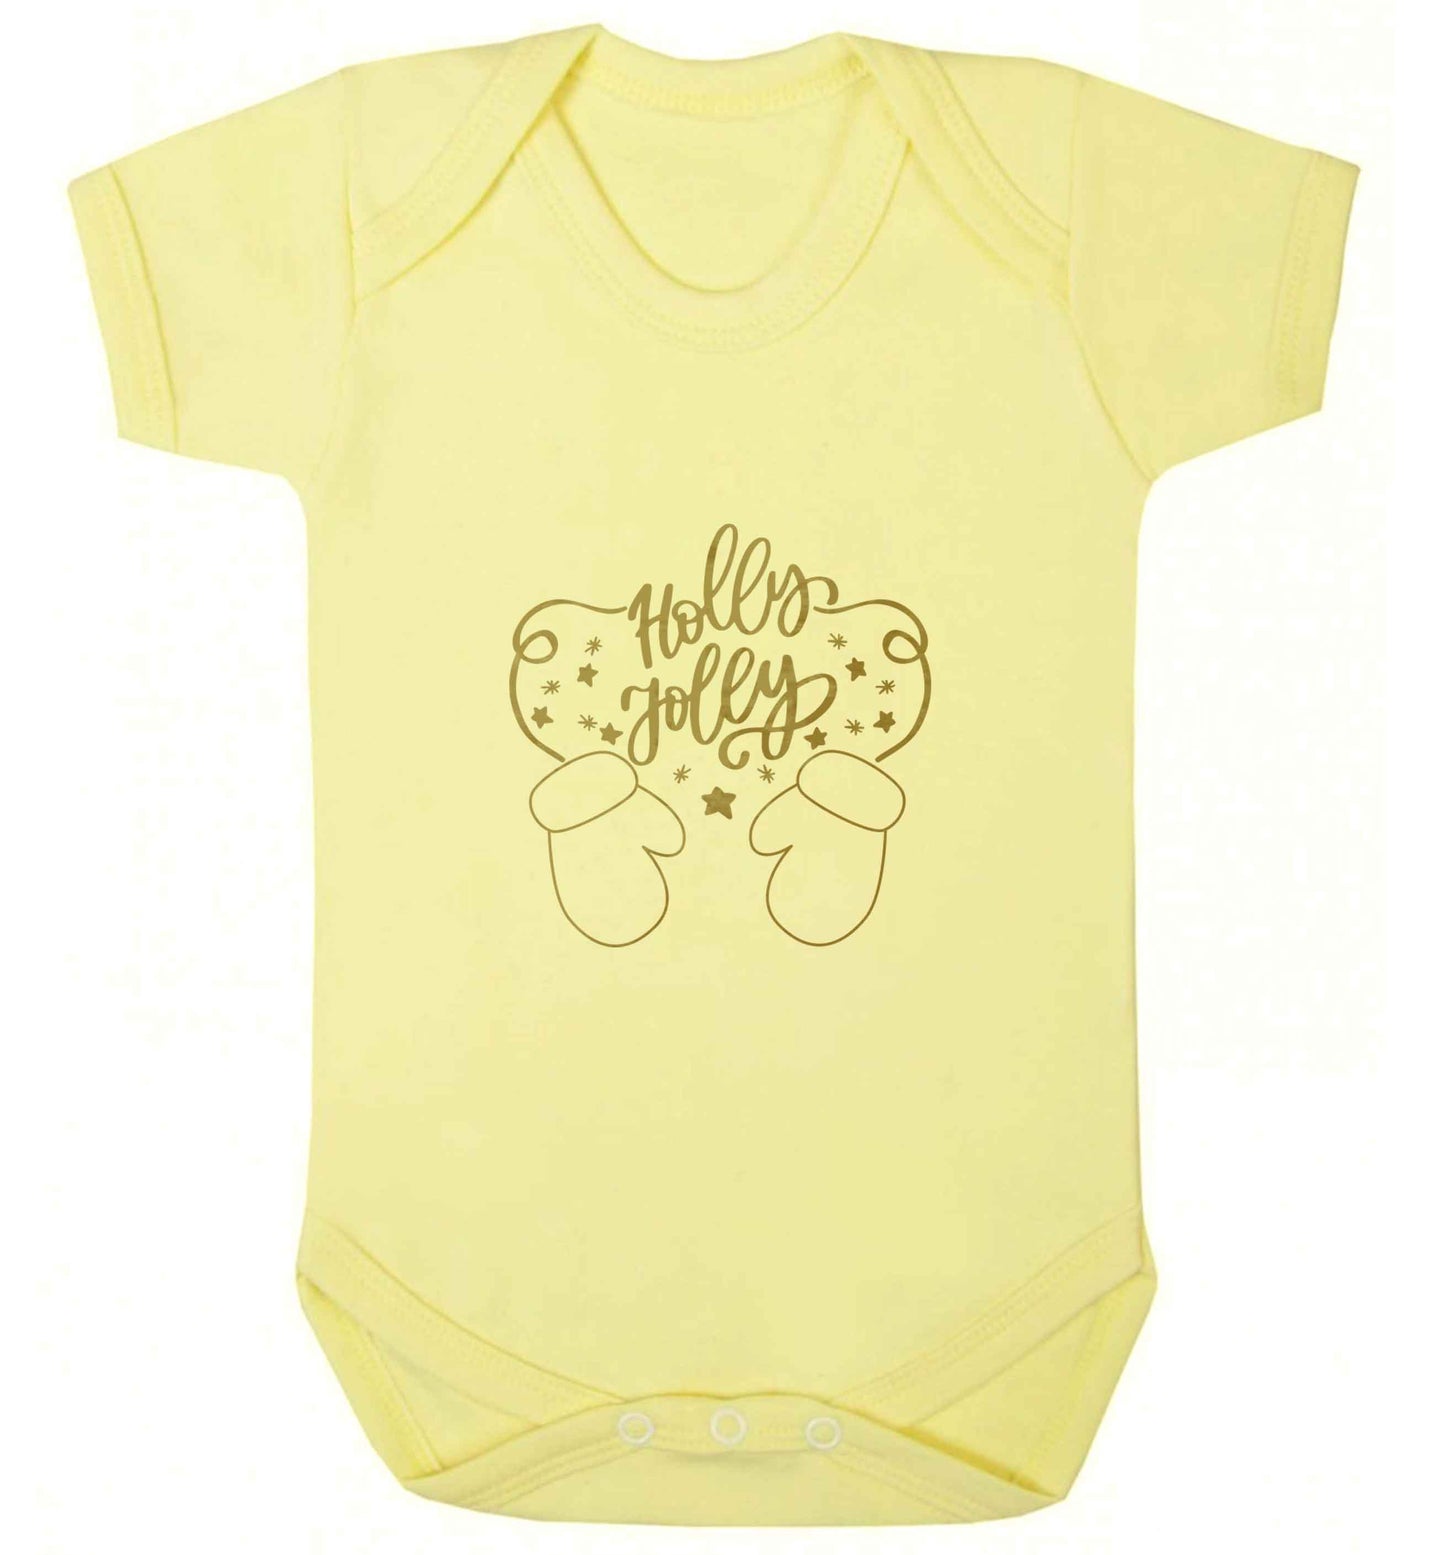 Holly jolly baby vest pale yellow 18-24 months